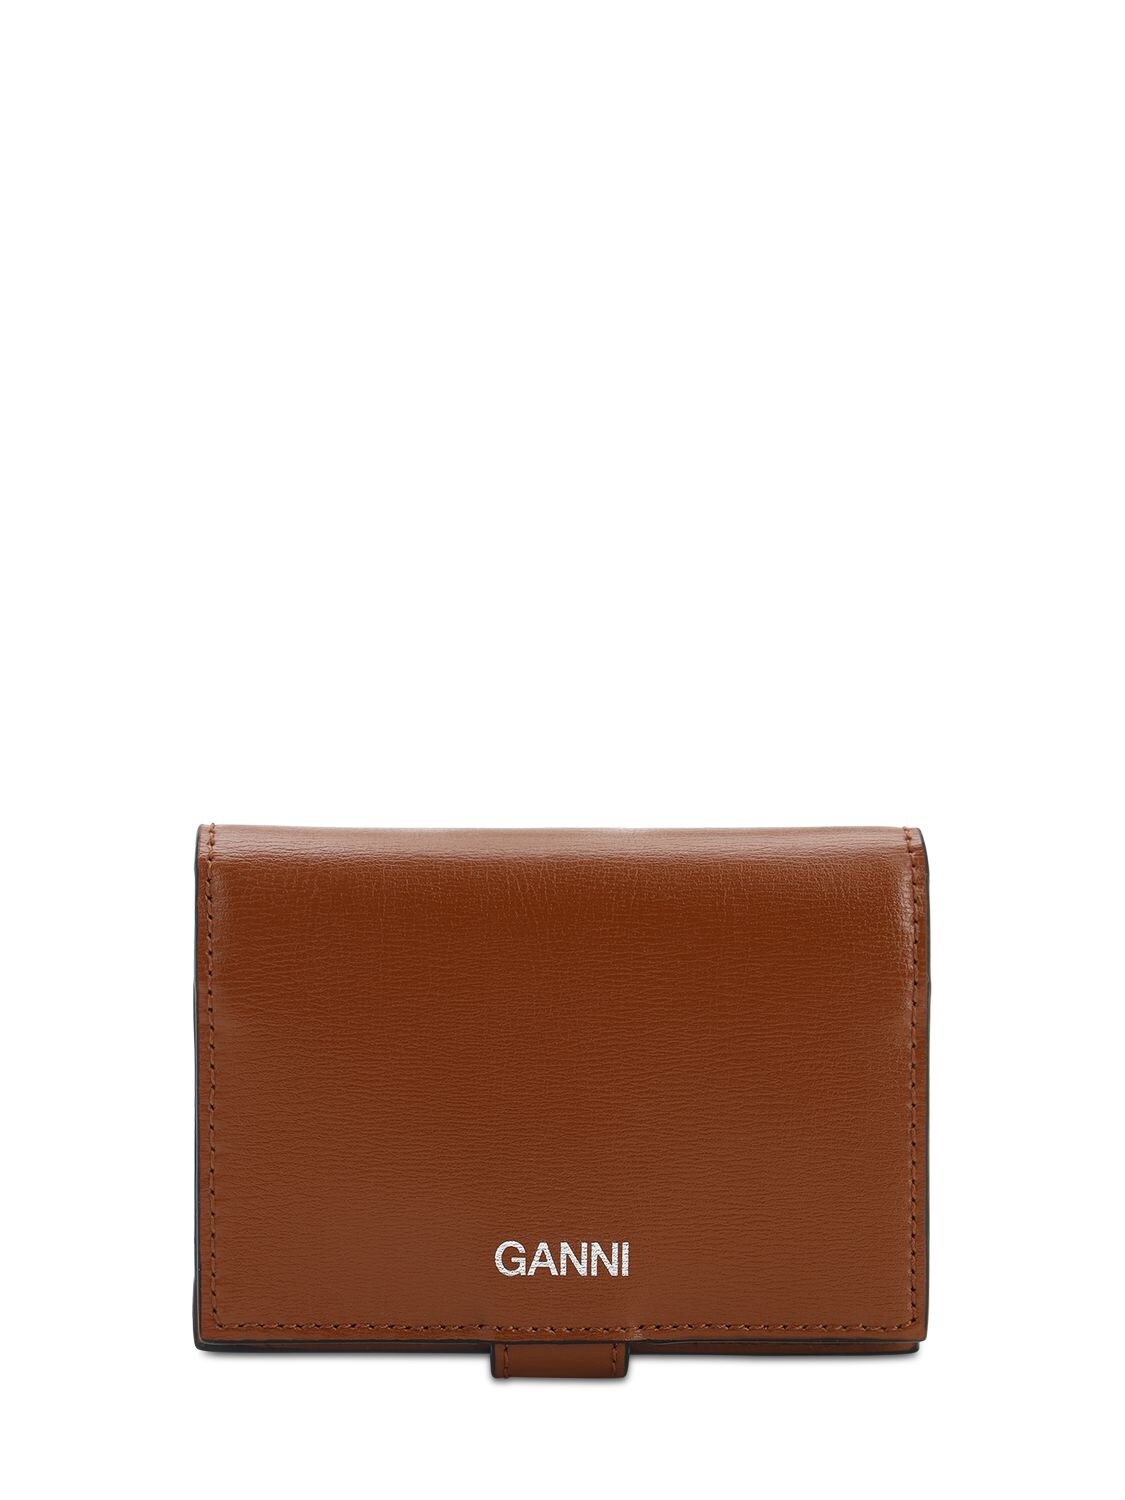 GANNI SMOOTH LEATHER COMPACT WALLET,71IJ5W013-MTMY0